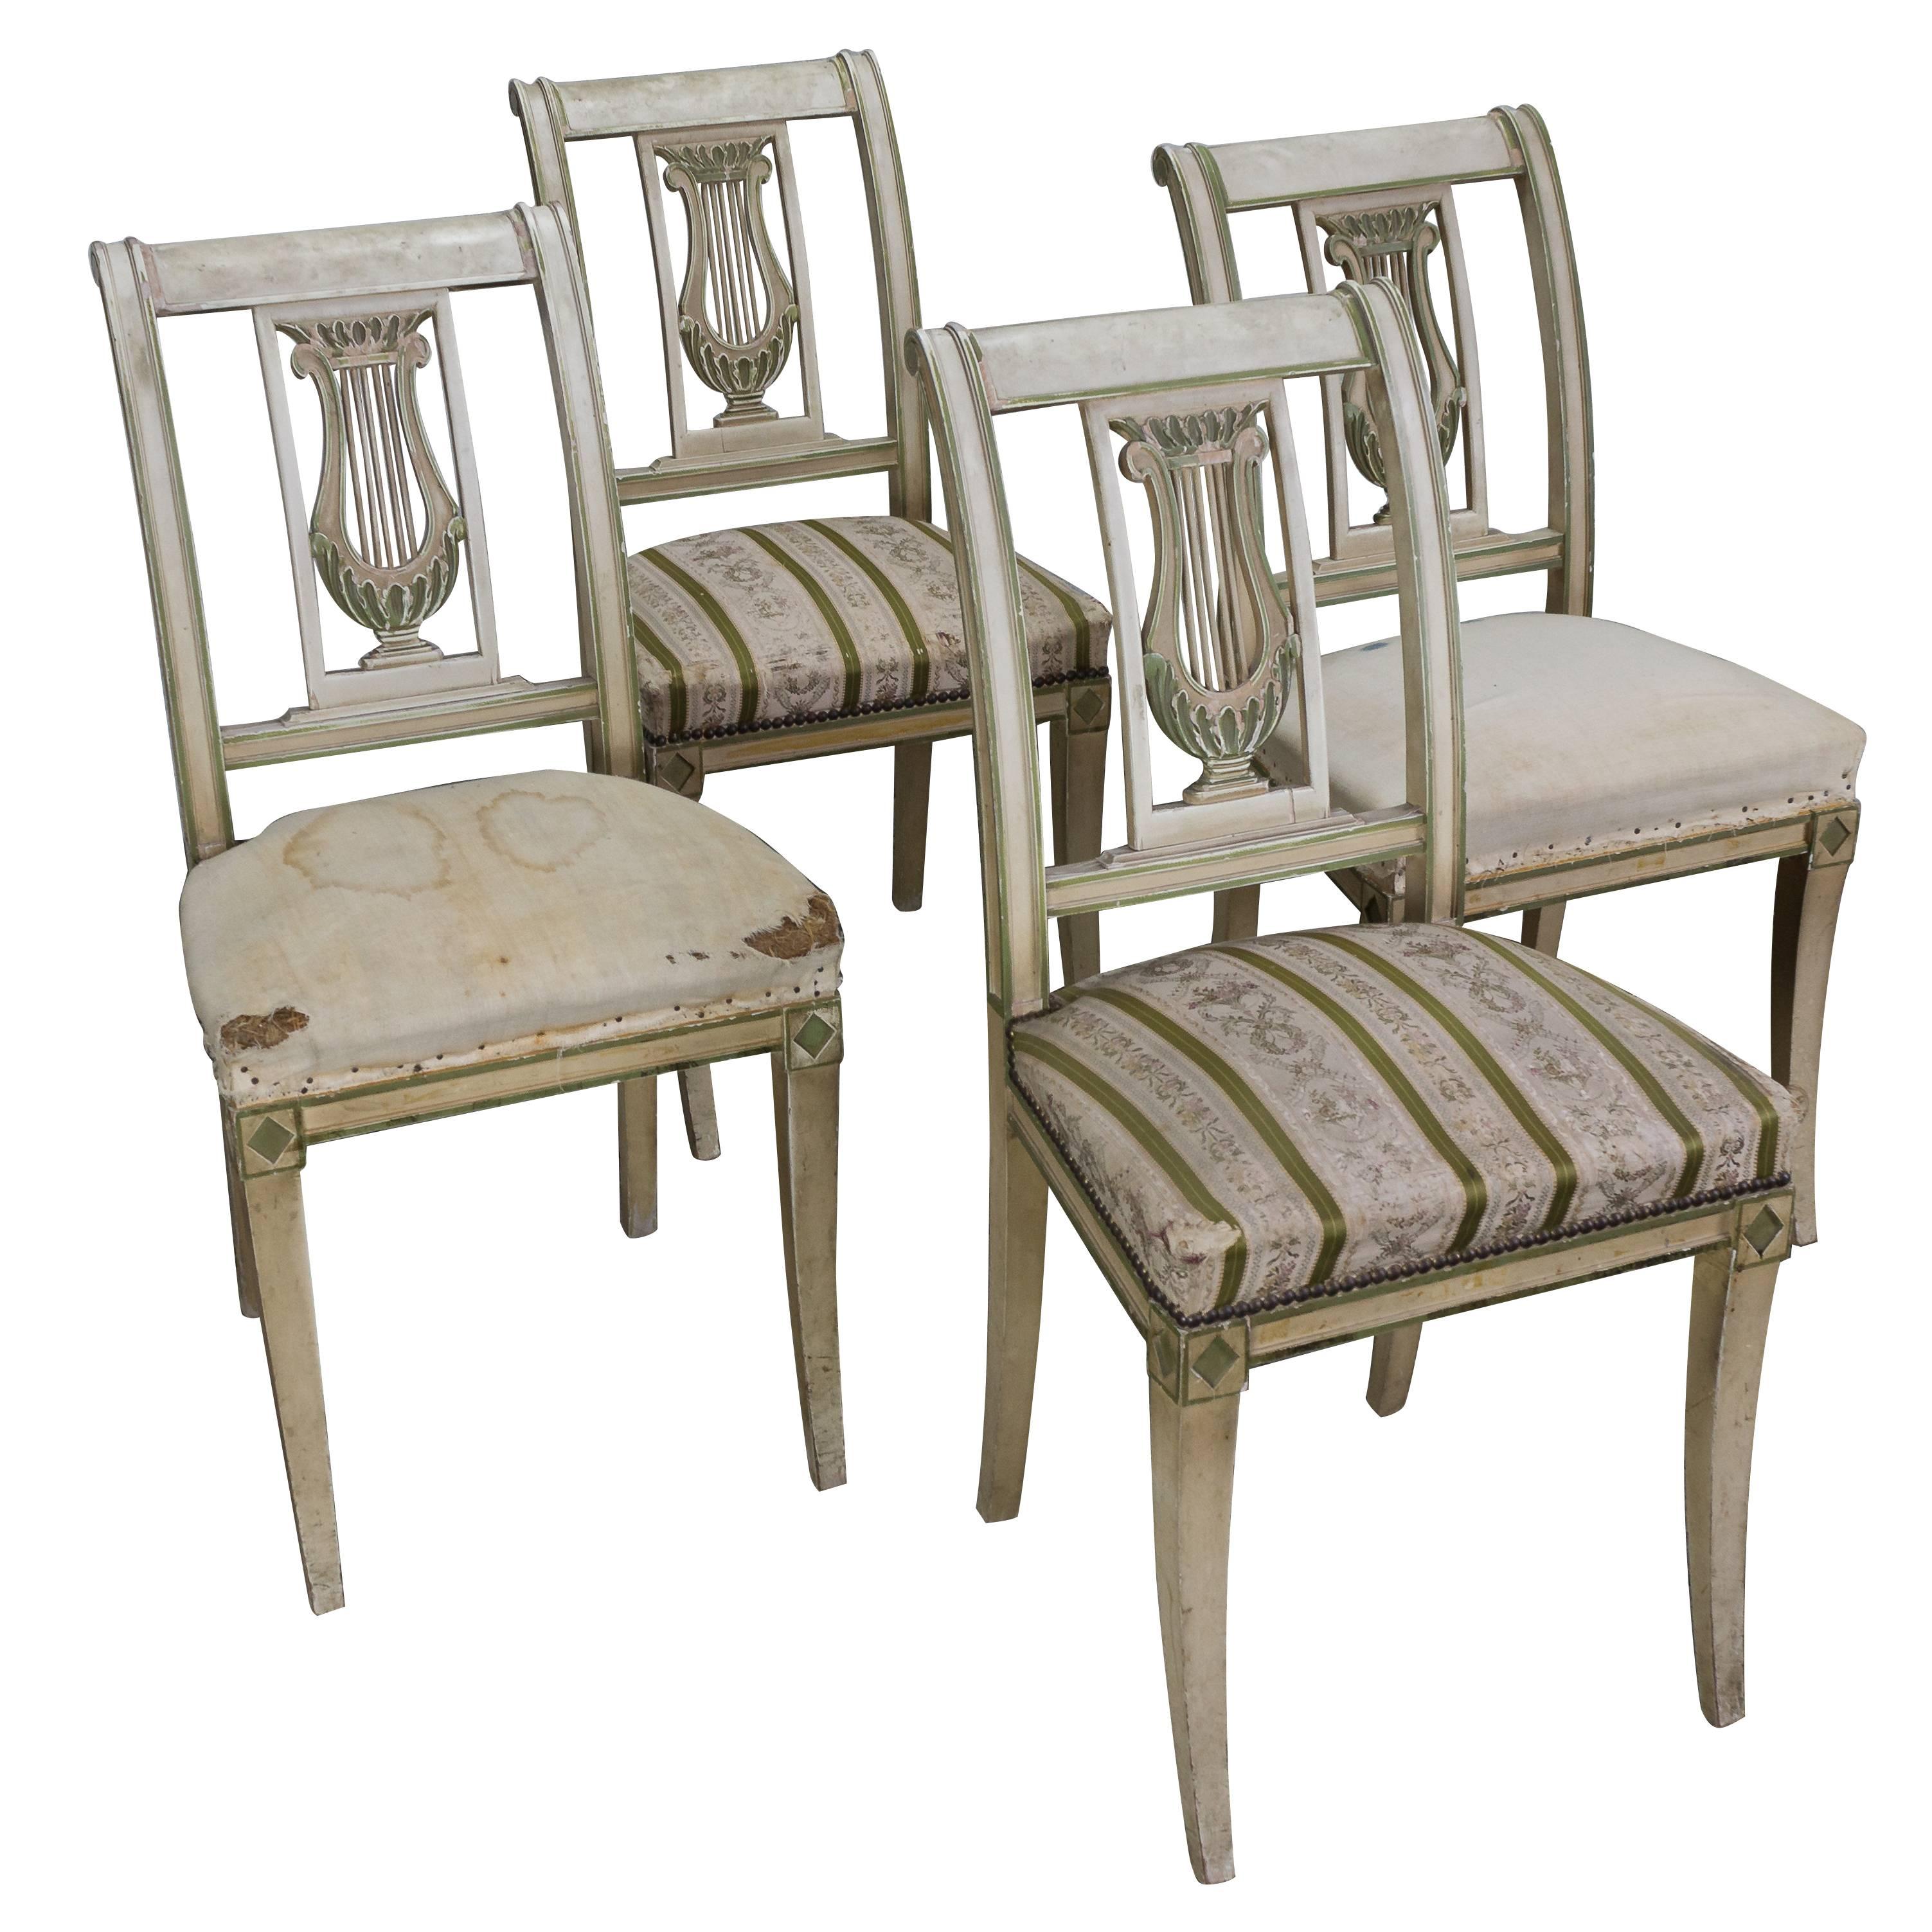 Set of Four French Dining Room Chairs